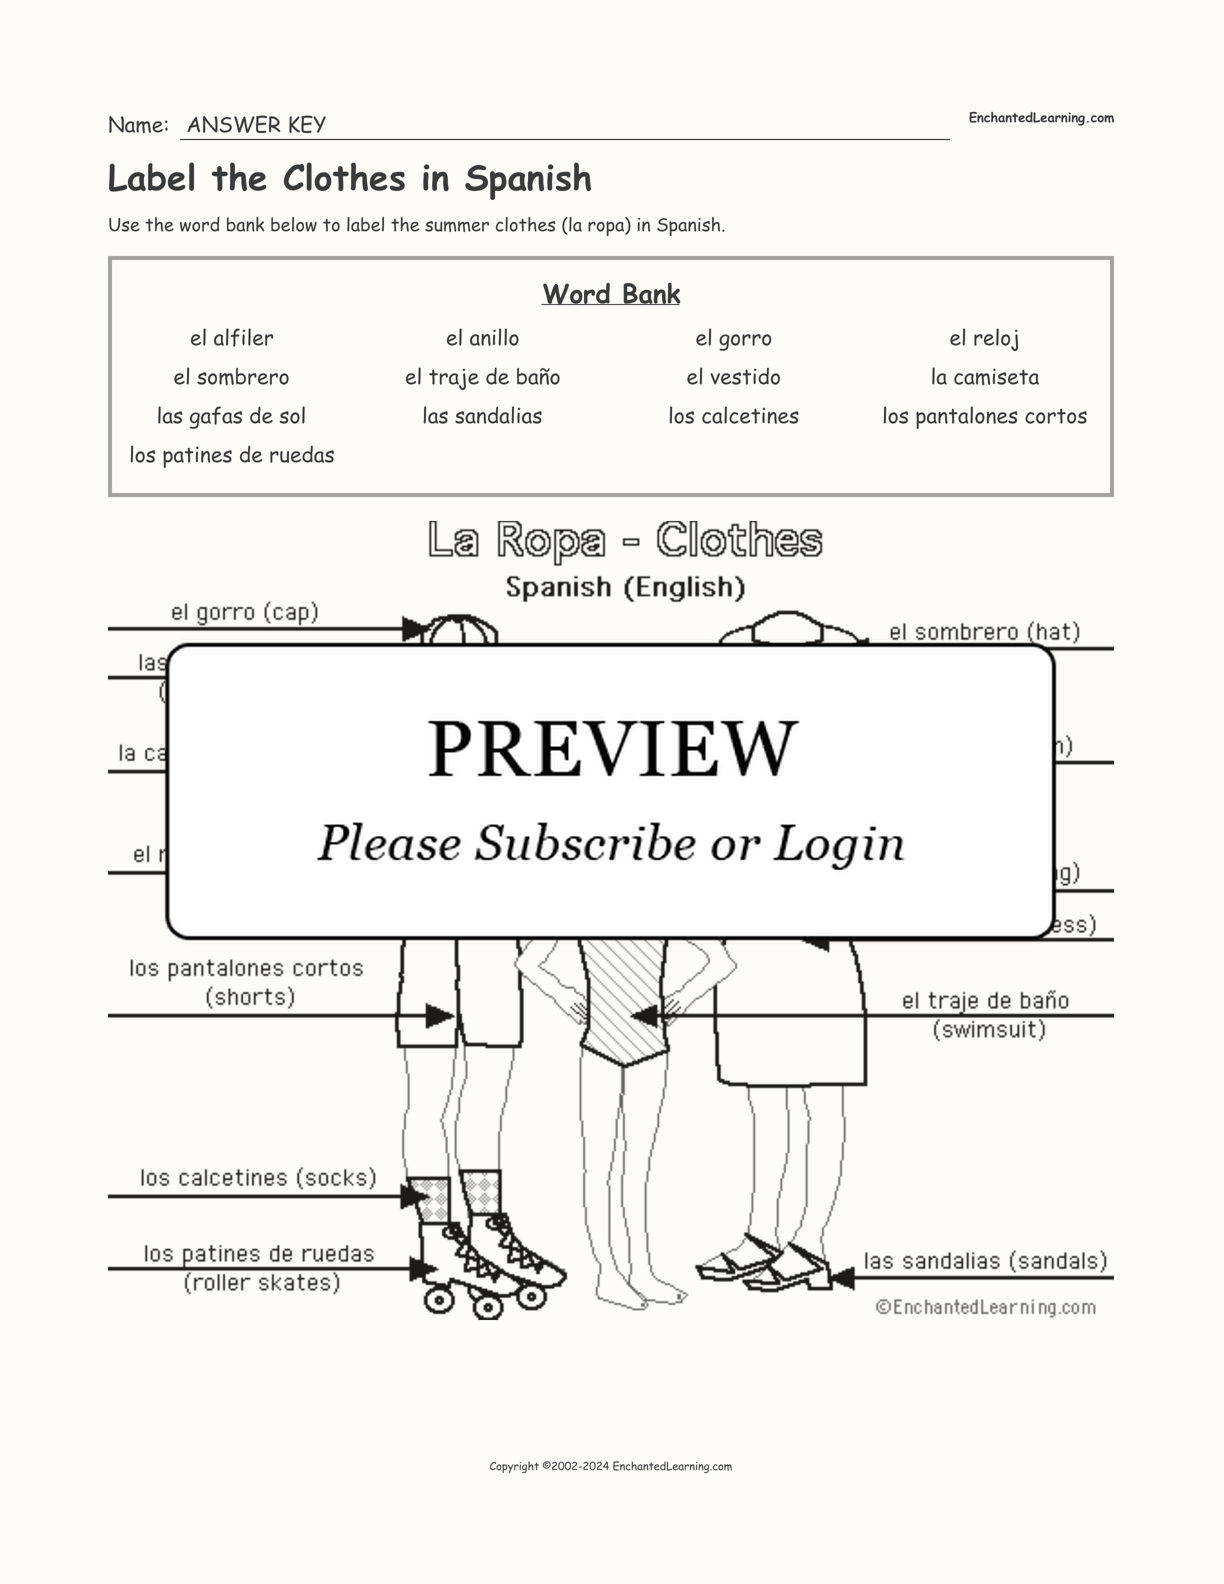 Label the Clothes in Spanish interactive worksheet page 2